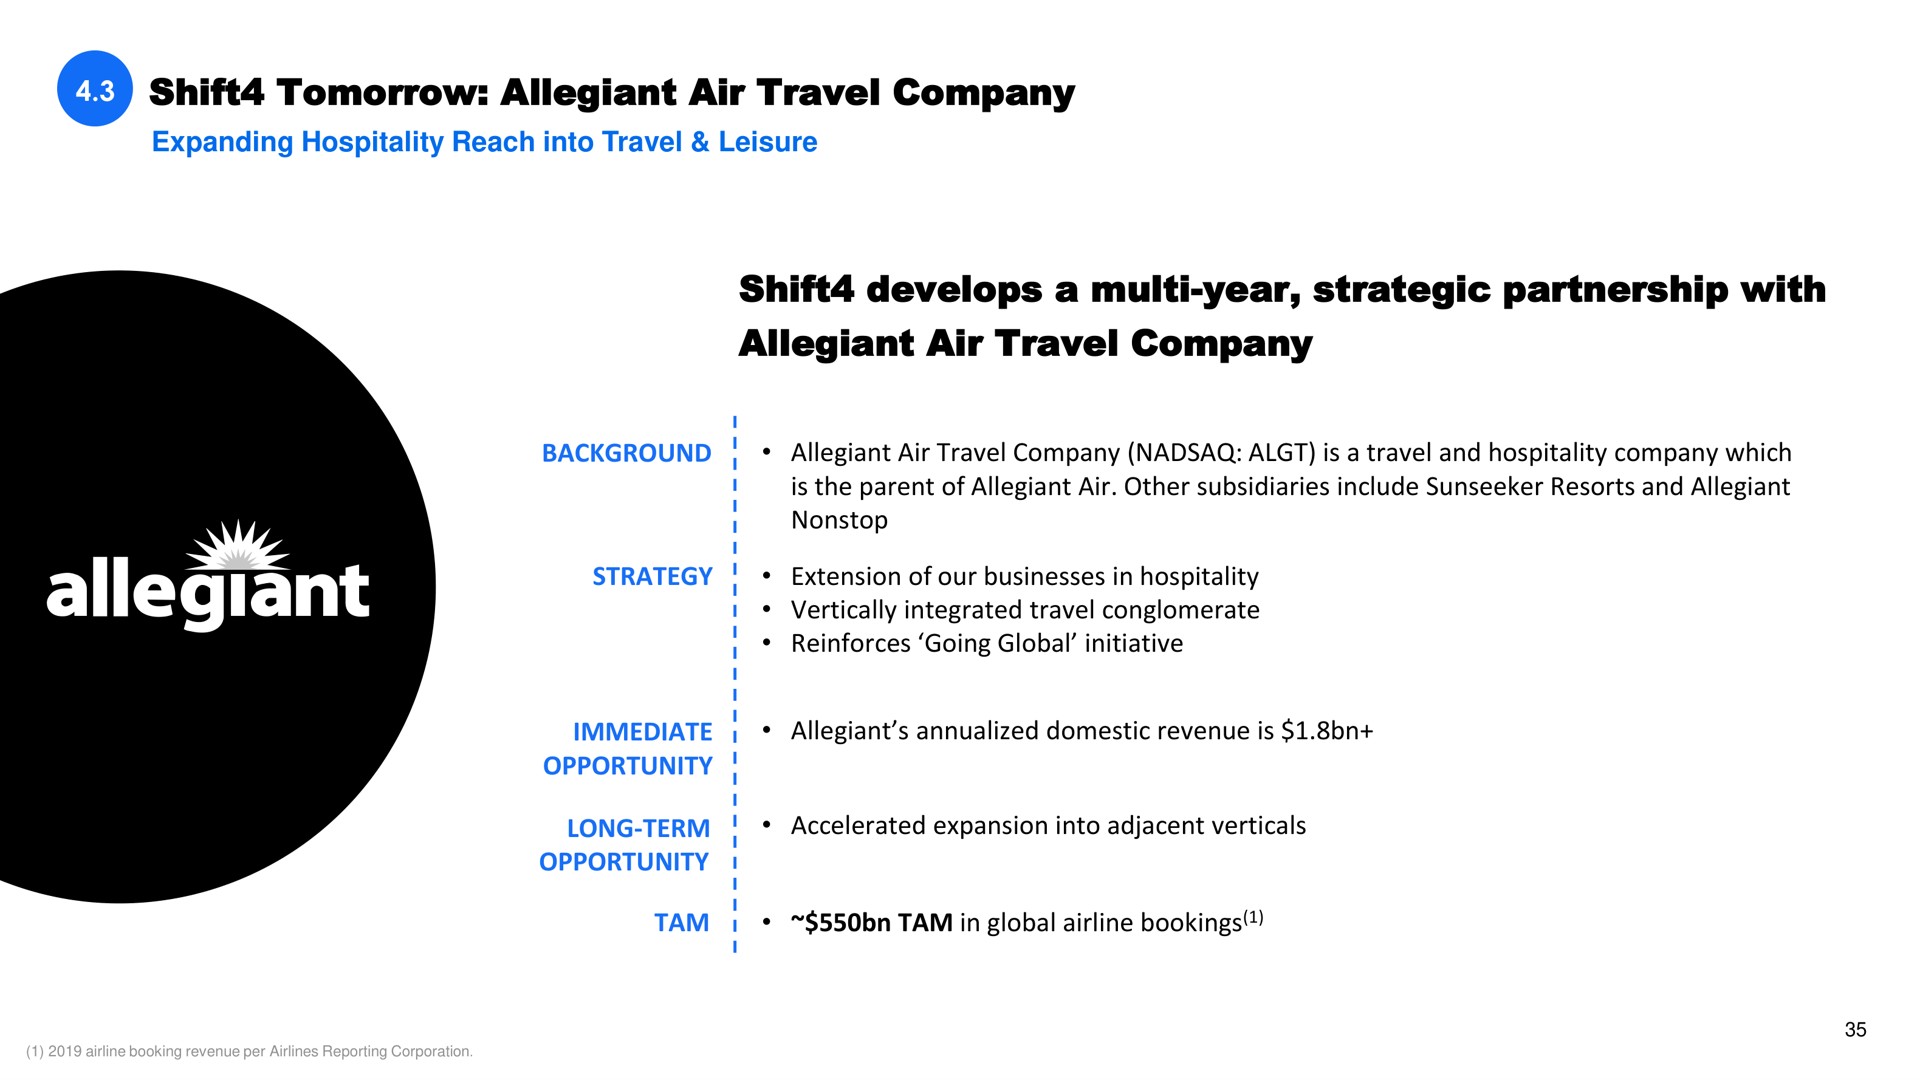 shift tomorrow allegiant air travel company expanding hospitality reach into travel leisure shift develops a year strategic partnership with allegiant air travel company background allegiant air travel company is a travel and hospitality company which is the parent of allegiant air other subsidiaries include resorts and allegiant nonstop strategy extension of our businesses in hospitality vertically integrated travel conglomerate reinforces going global initiative immediate opportunity long term opportunity allegiant domestic revenue is accelerated expansion into adjacent verticals tam tam in global bookings | Shift4